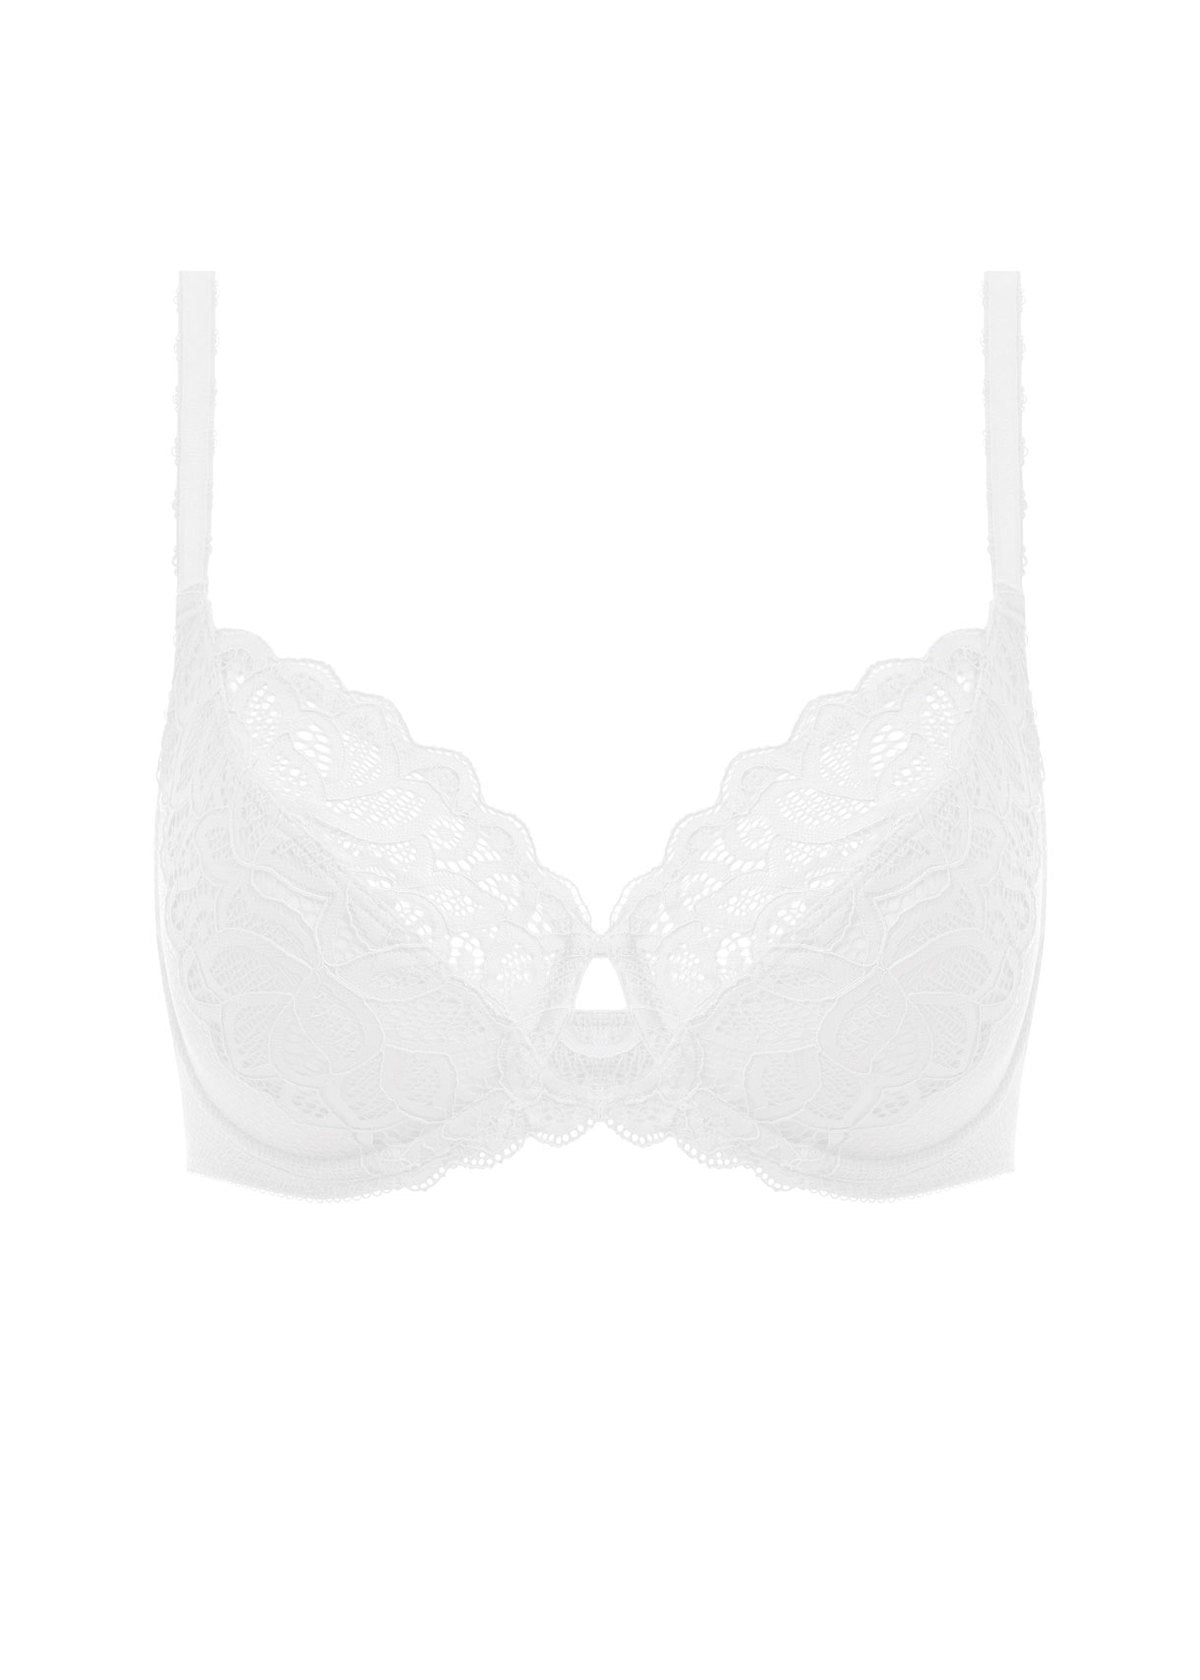 Wacoal Lace Perfection Underwired Bra, Botanical Green